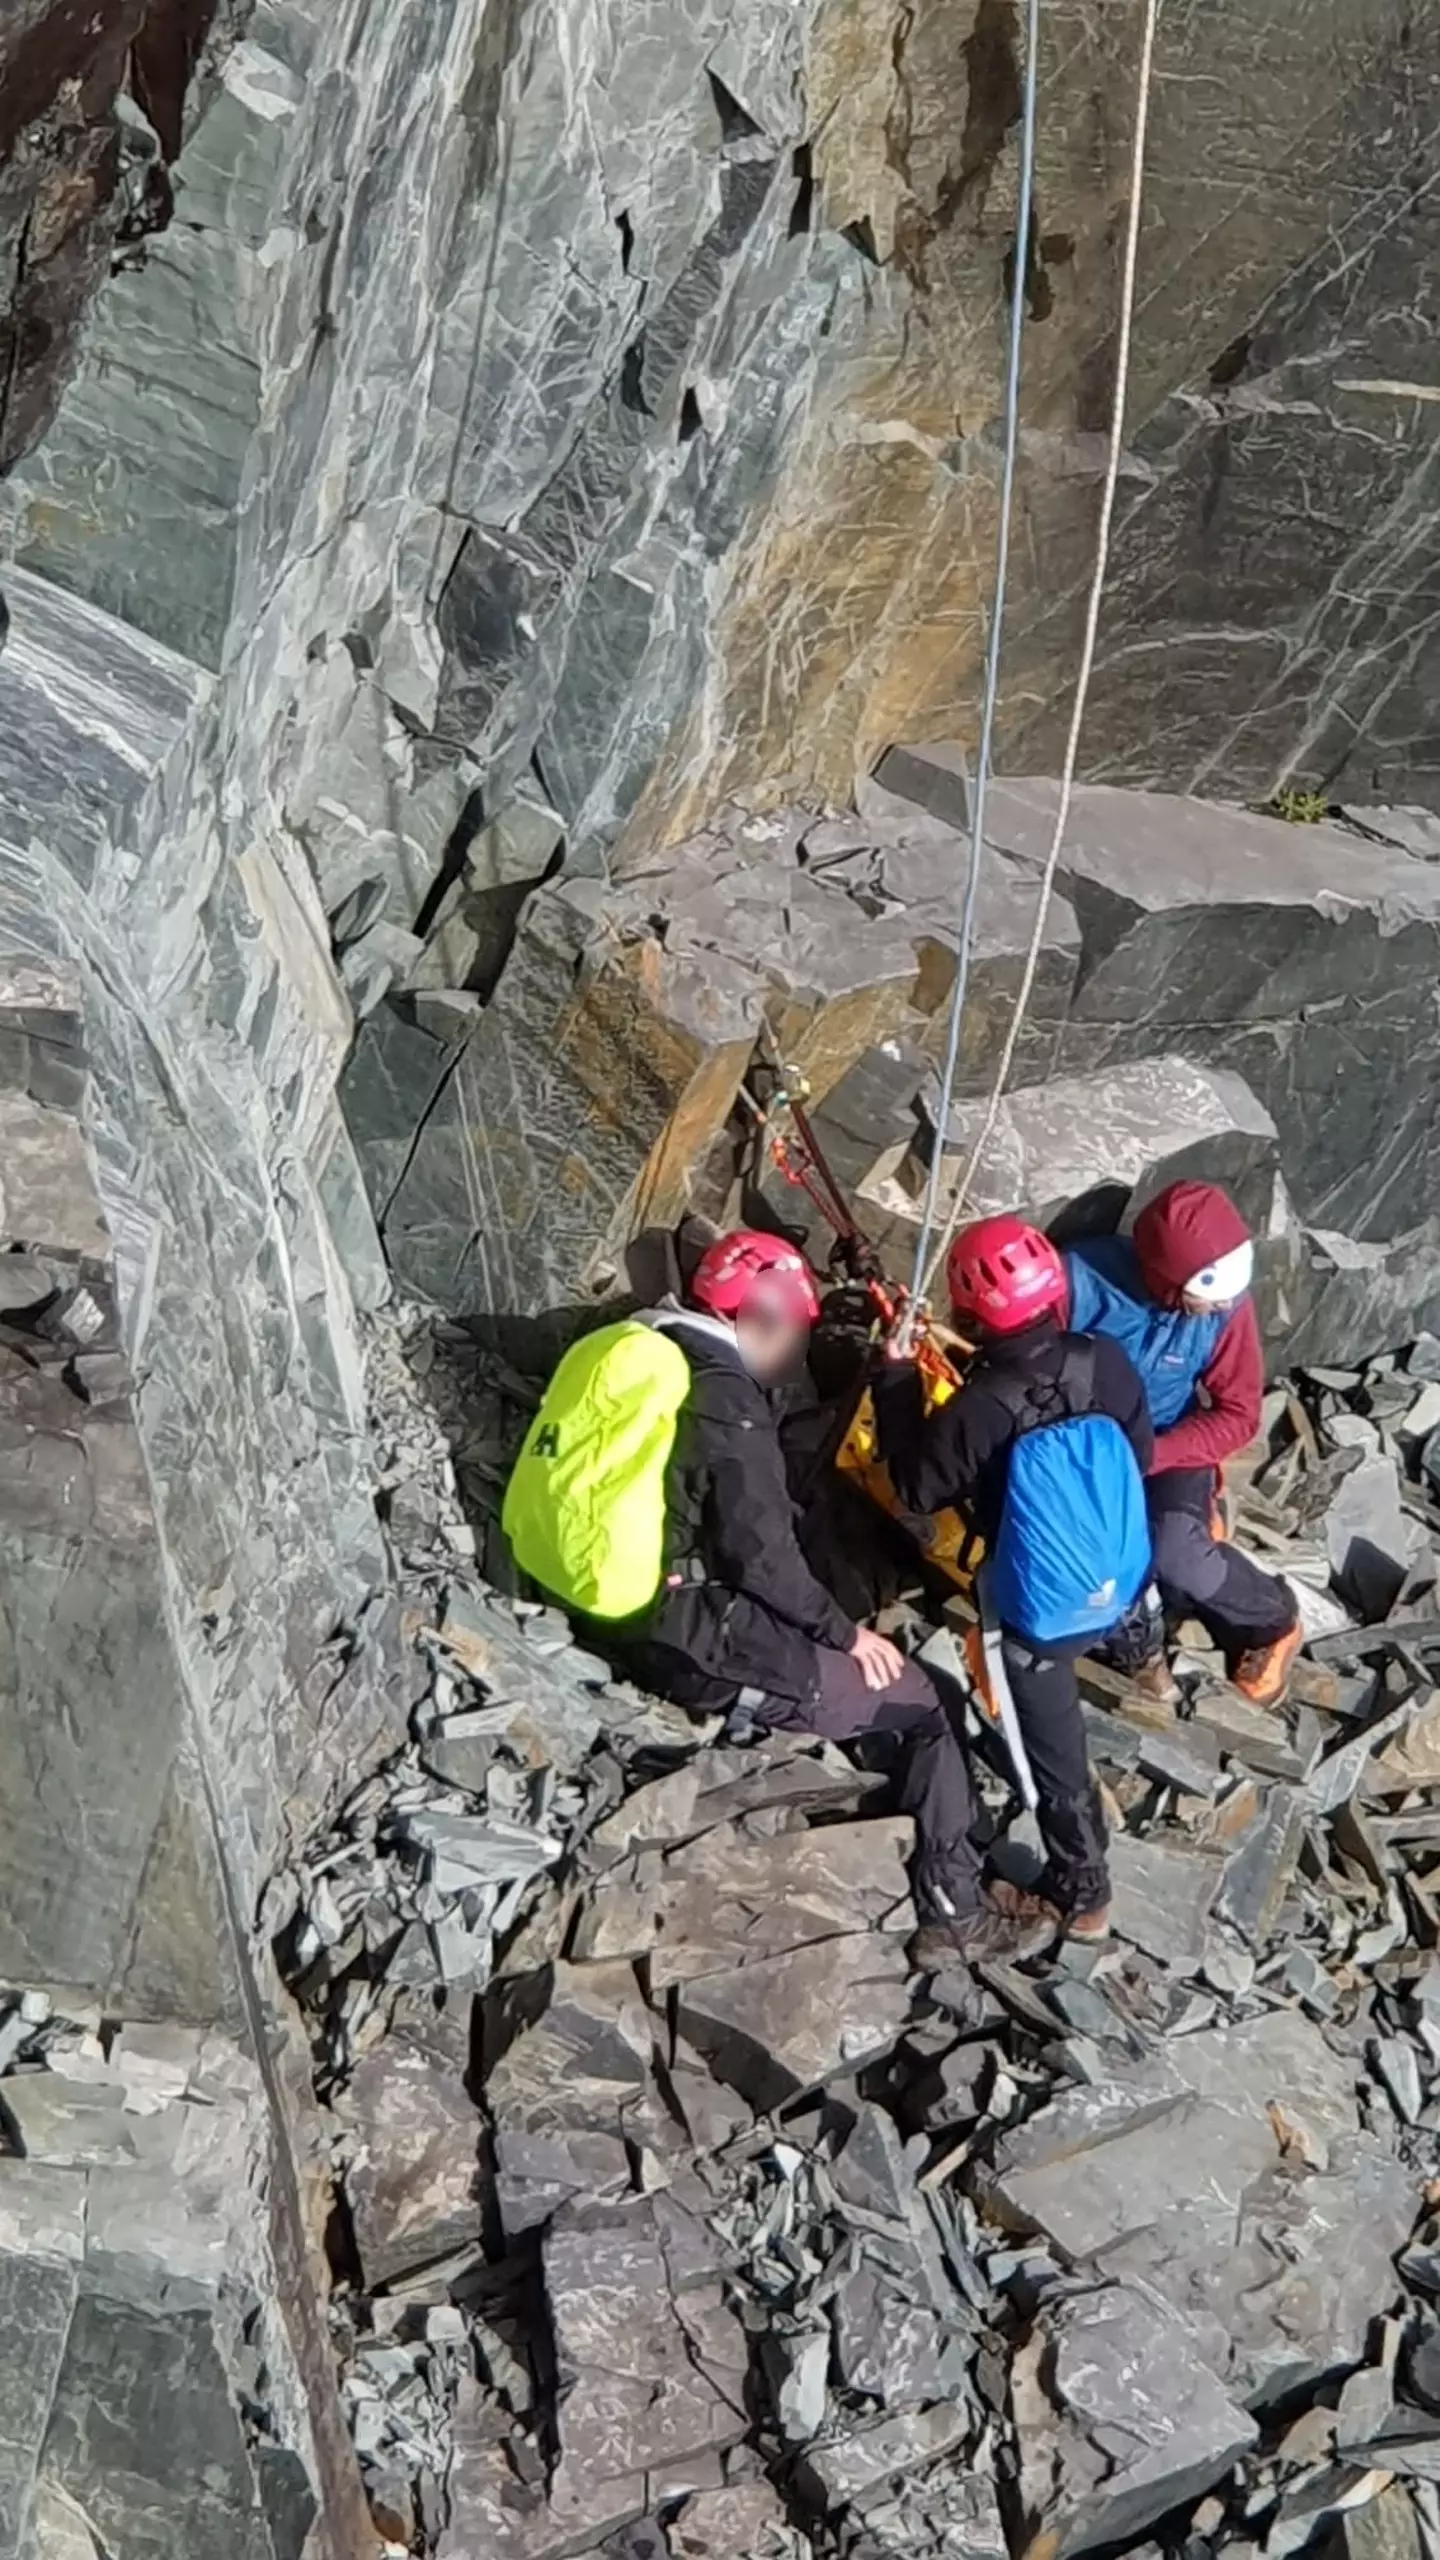 A group of climbers had to be rescued from the quarries.